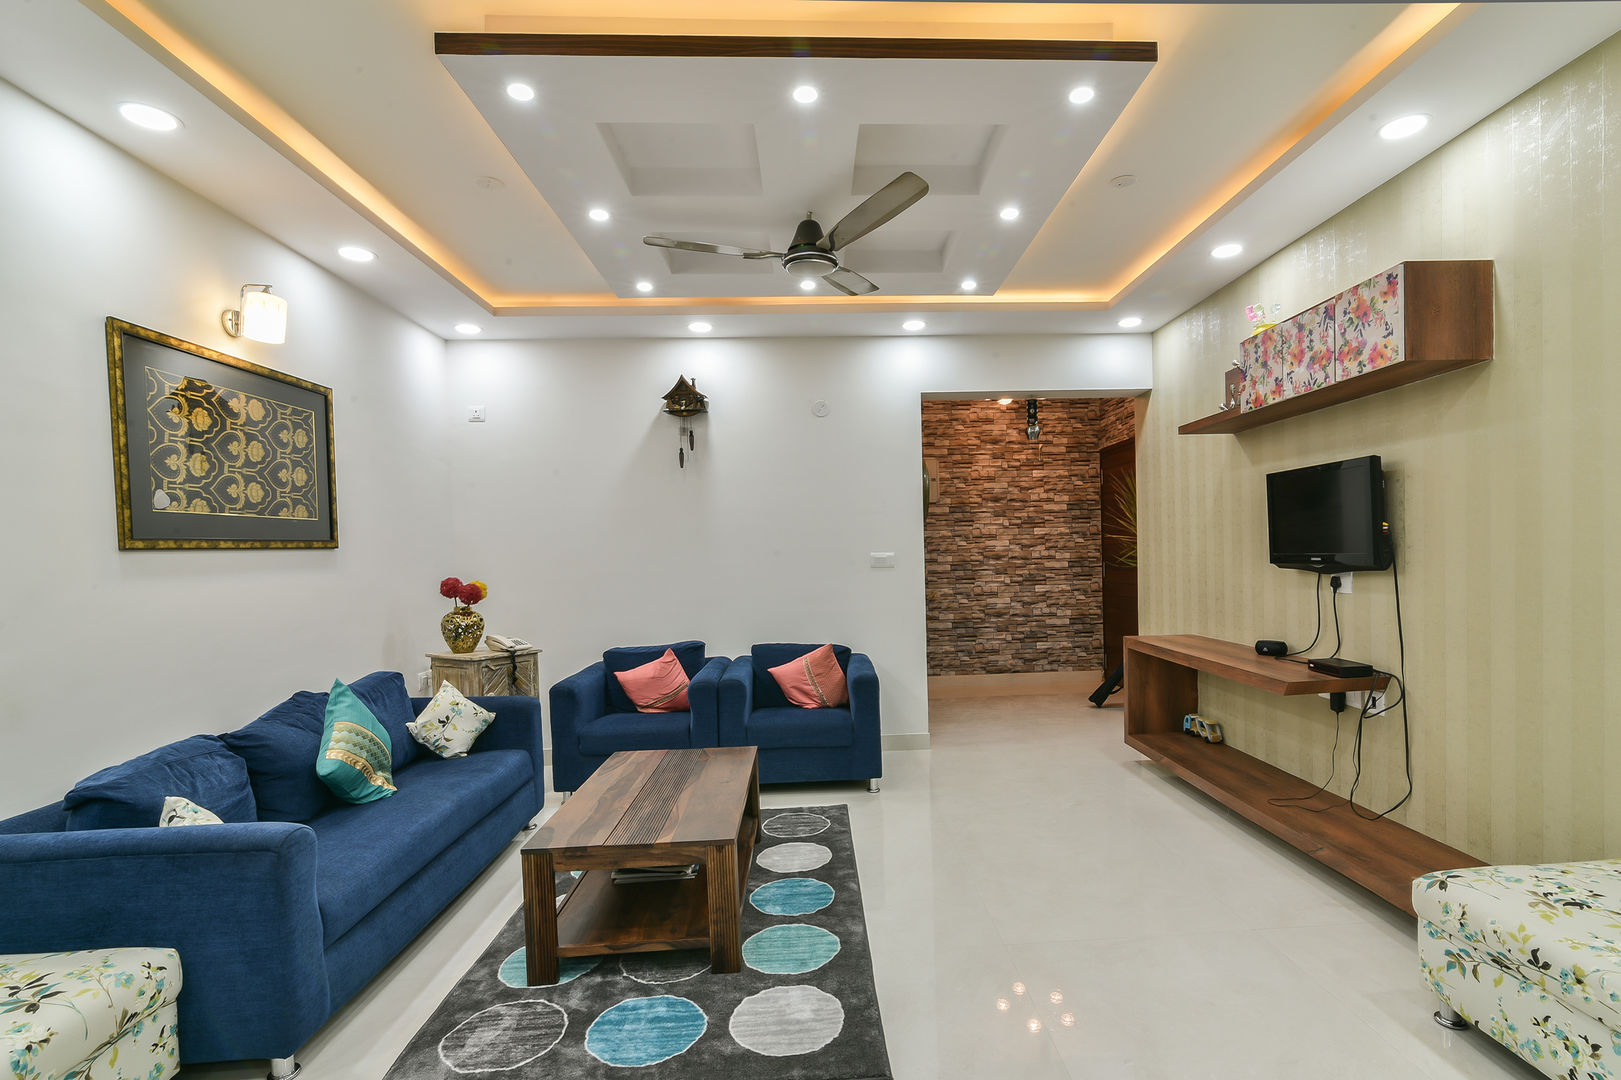 Gloryfields Apartment - Bangalore, Wenzelsmith Interior Design Pvt Ltd Wenzelsmith Interior Design Pvt Ltd Classic style living room